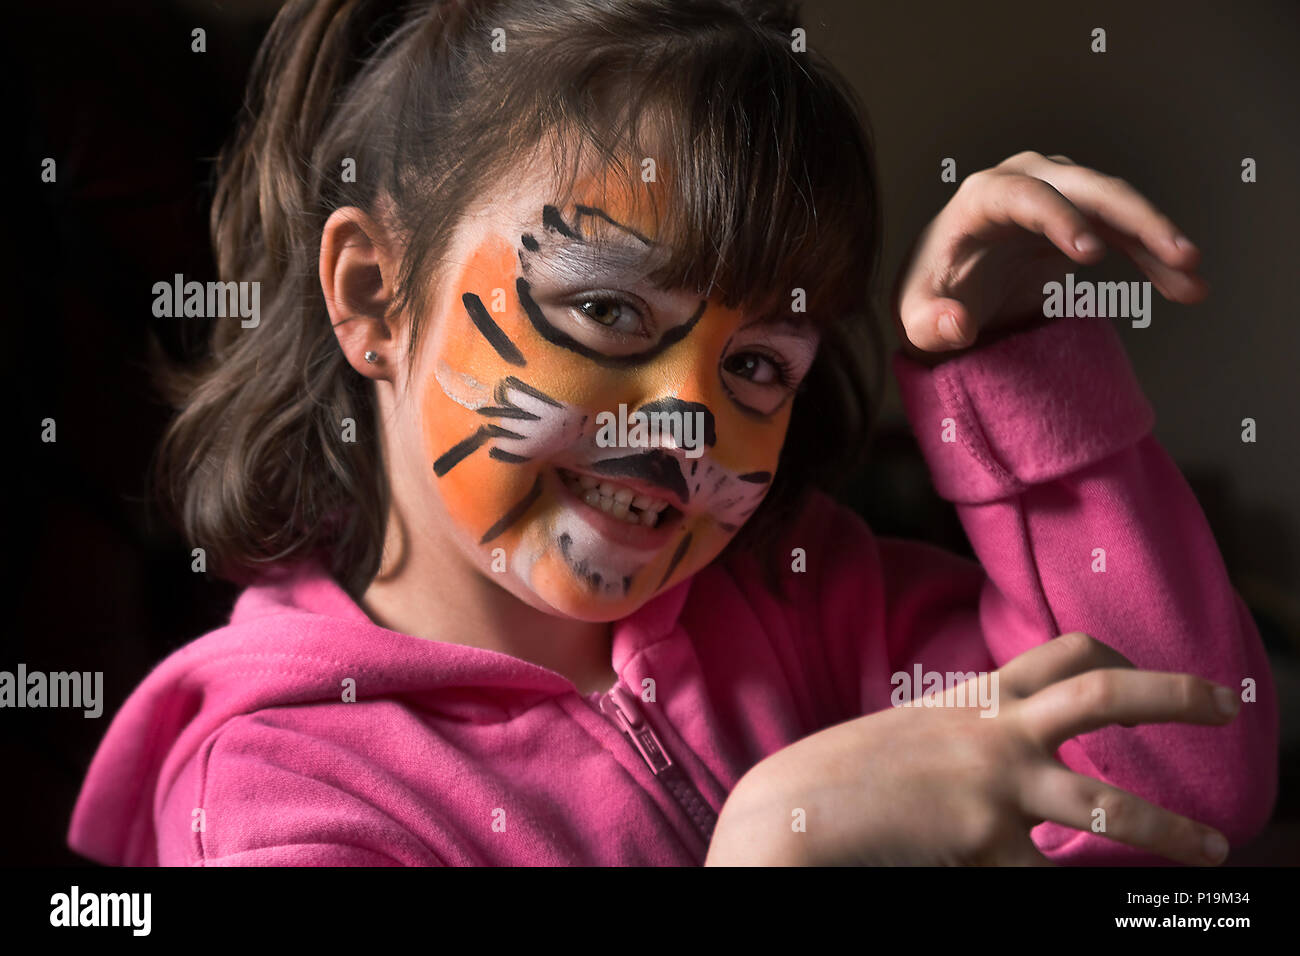 Little girl with tiger face painting imitating tiger growl to camera Stock Photo